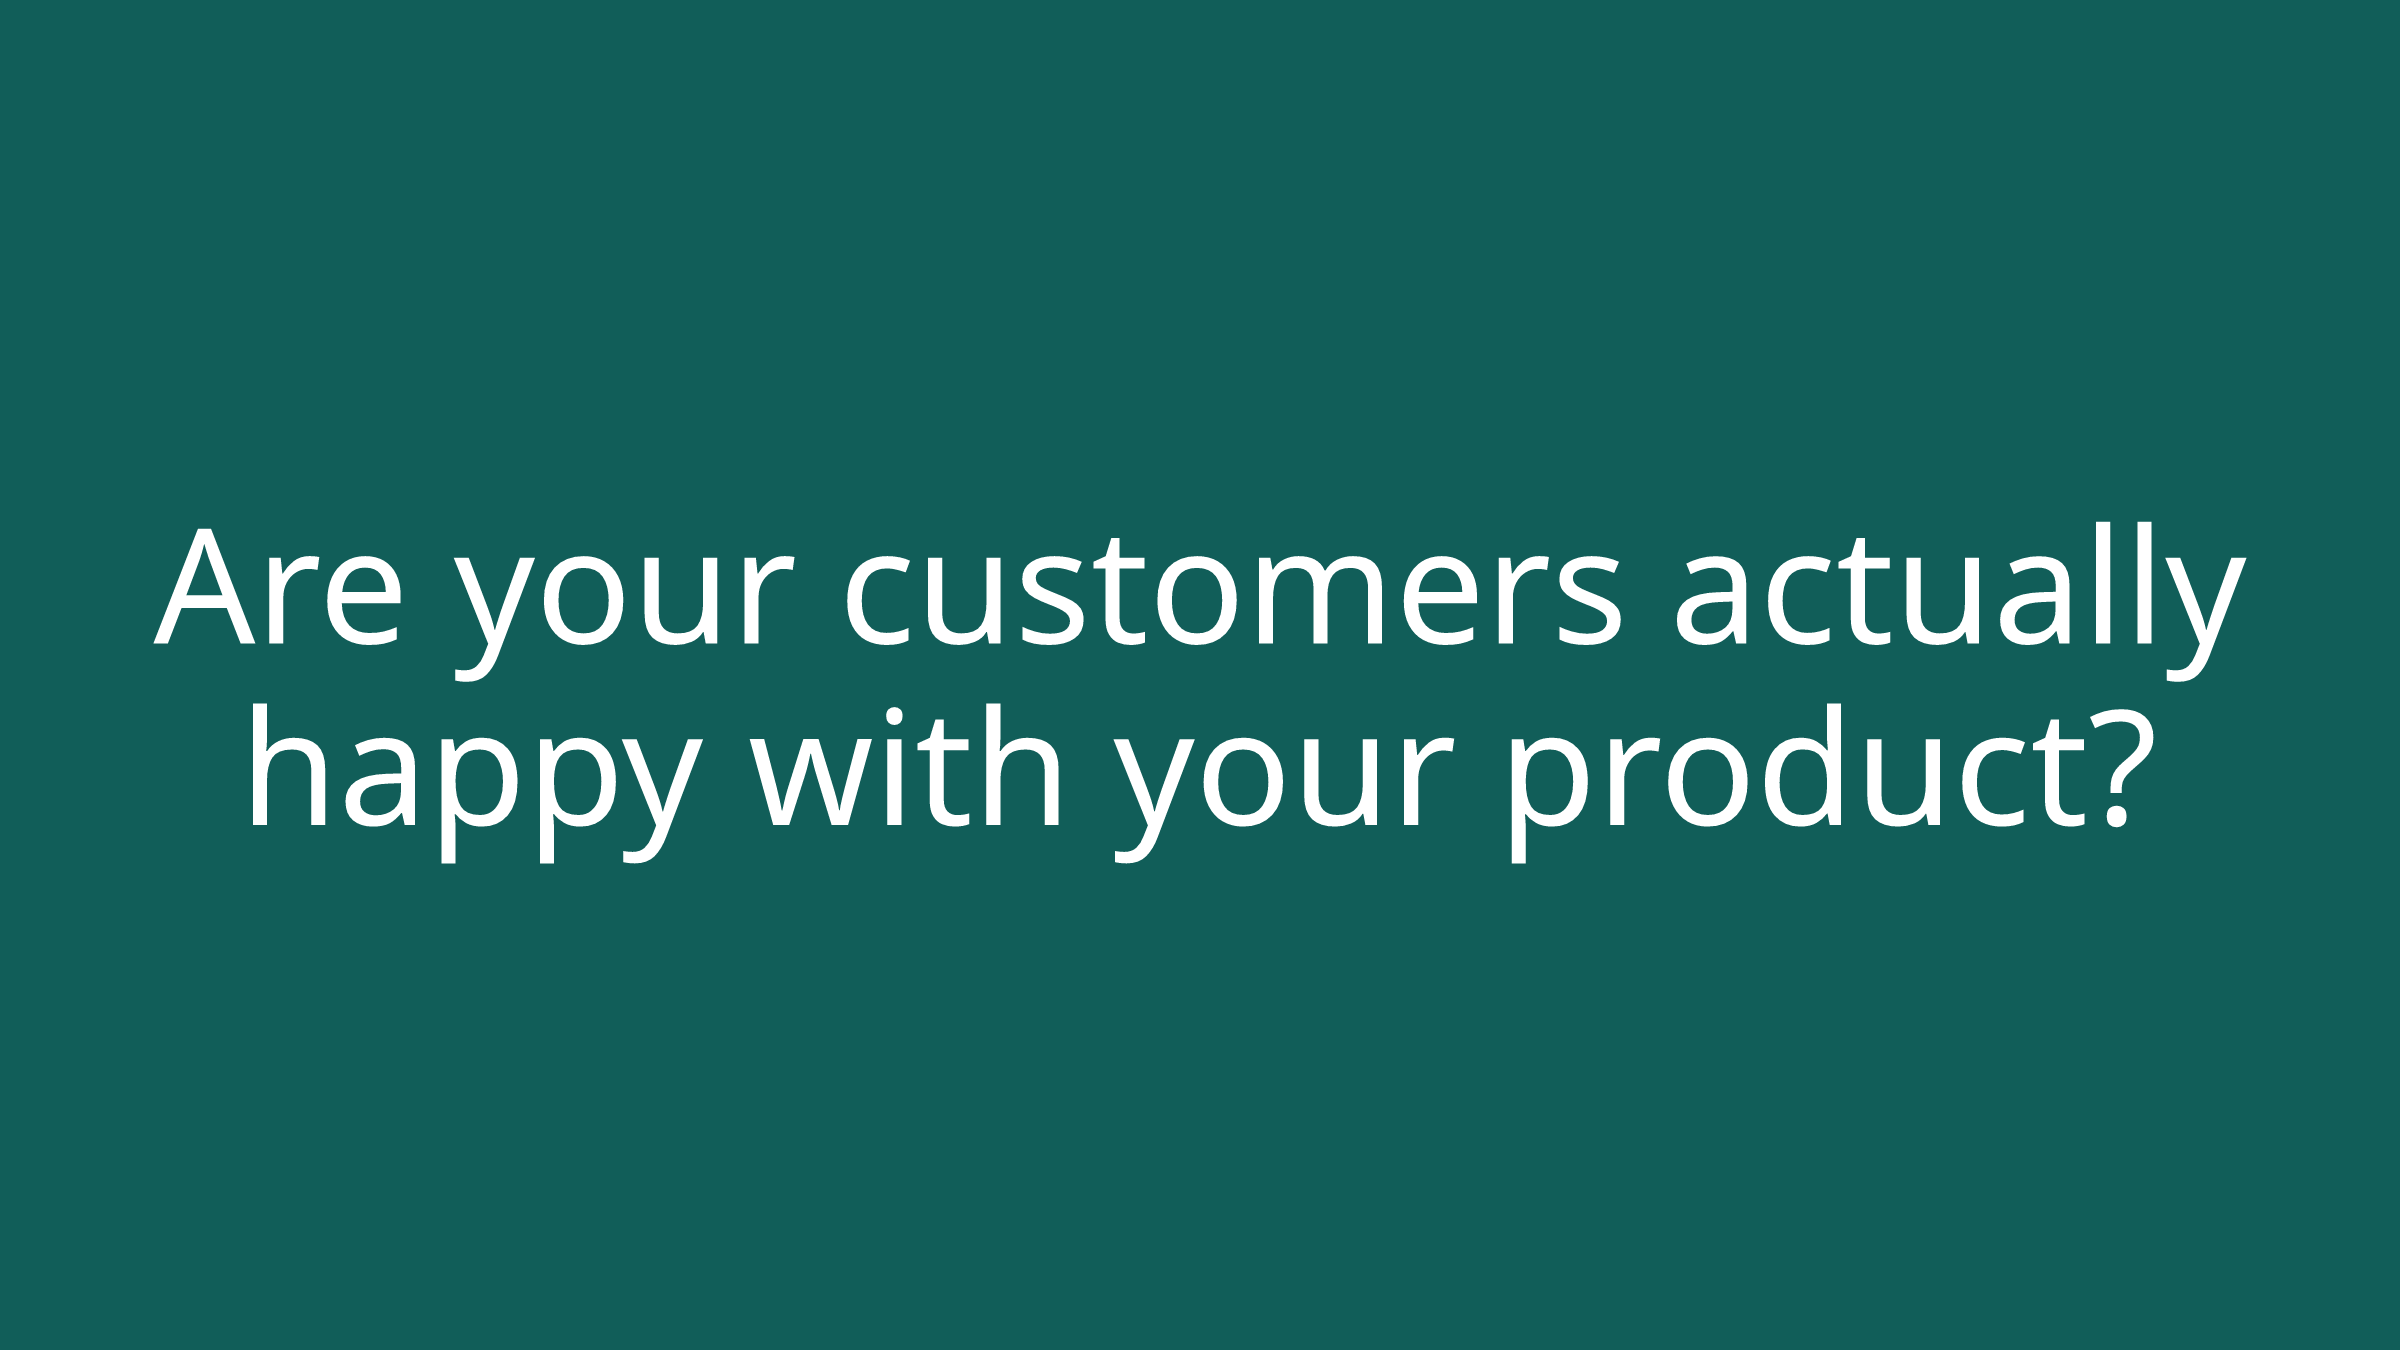 Are your customers actually happy with your product?